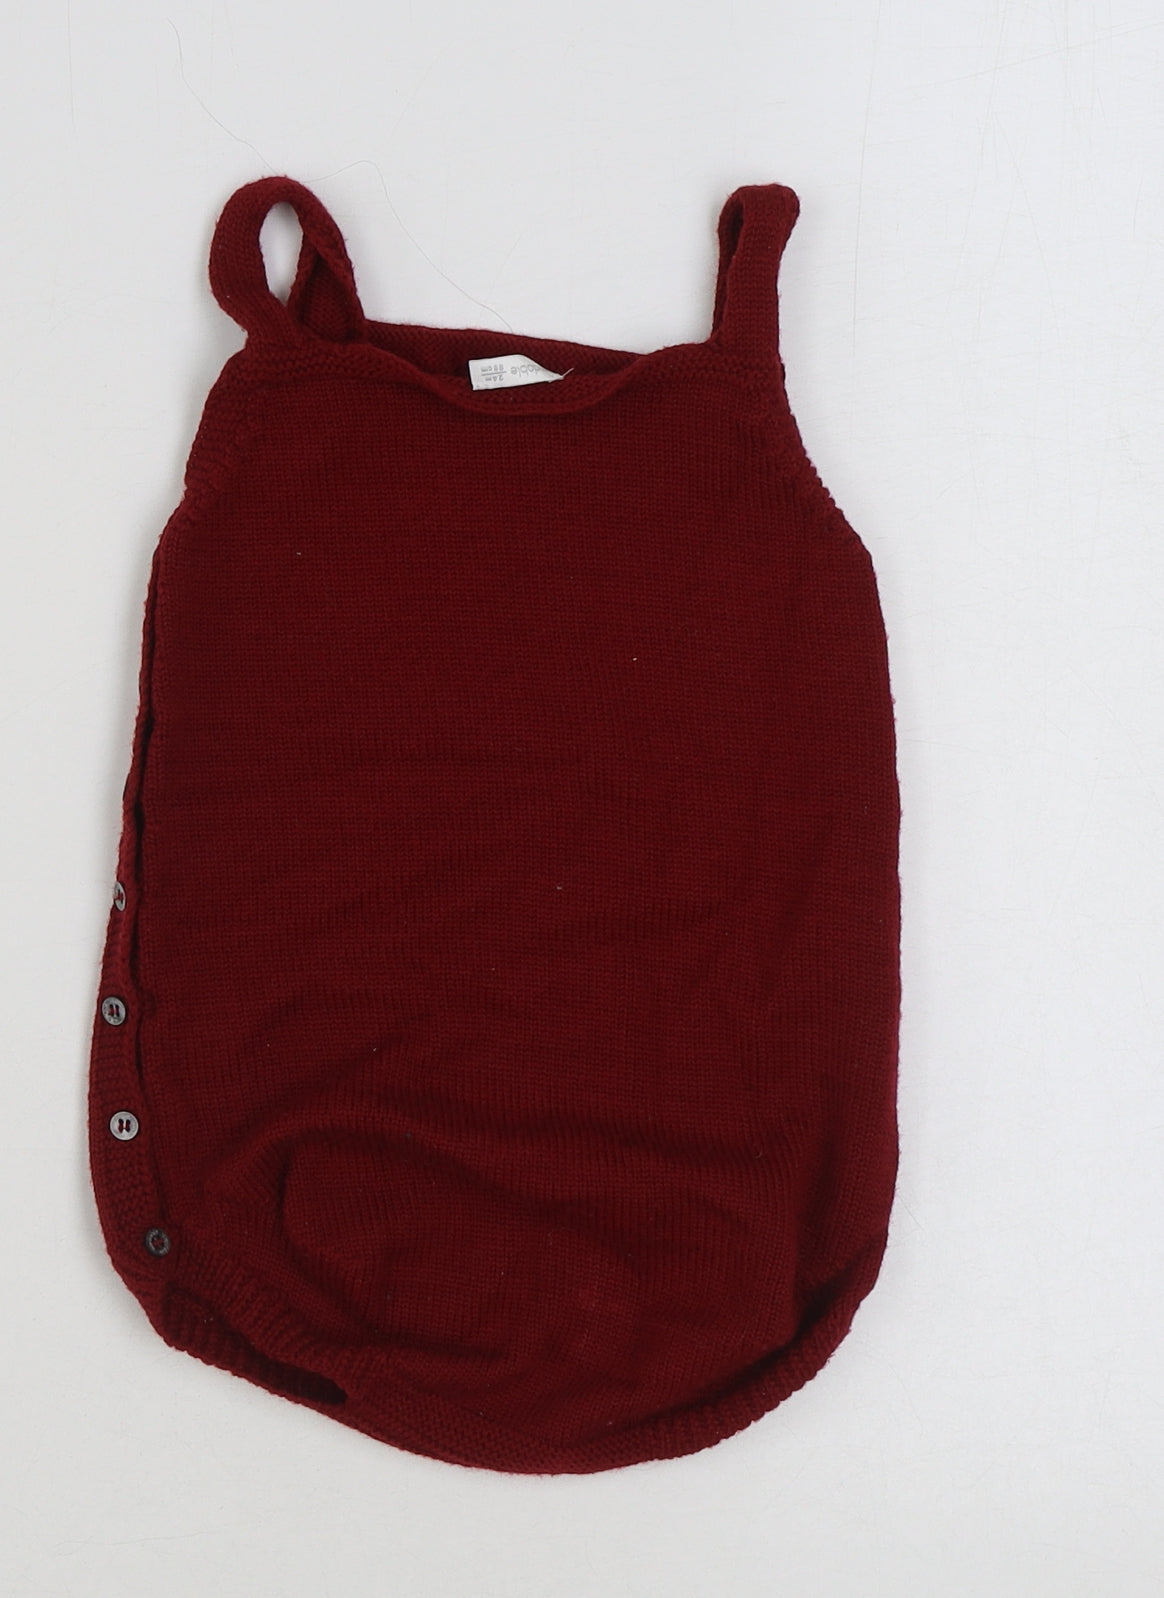 Wedoble Baby Red Acrylic Bodysuit Outfit/Set Size 24 Months Button